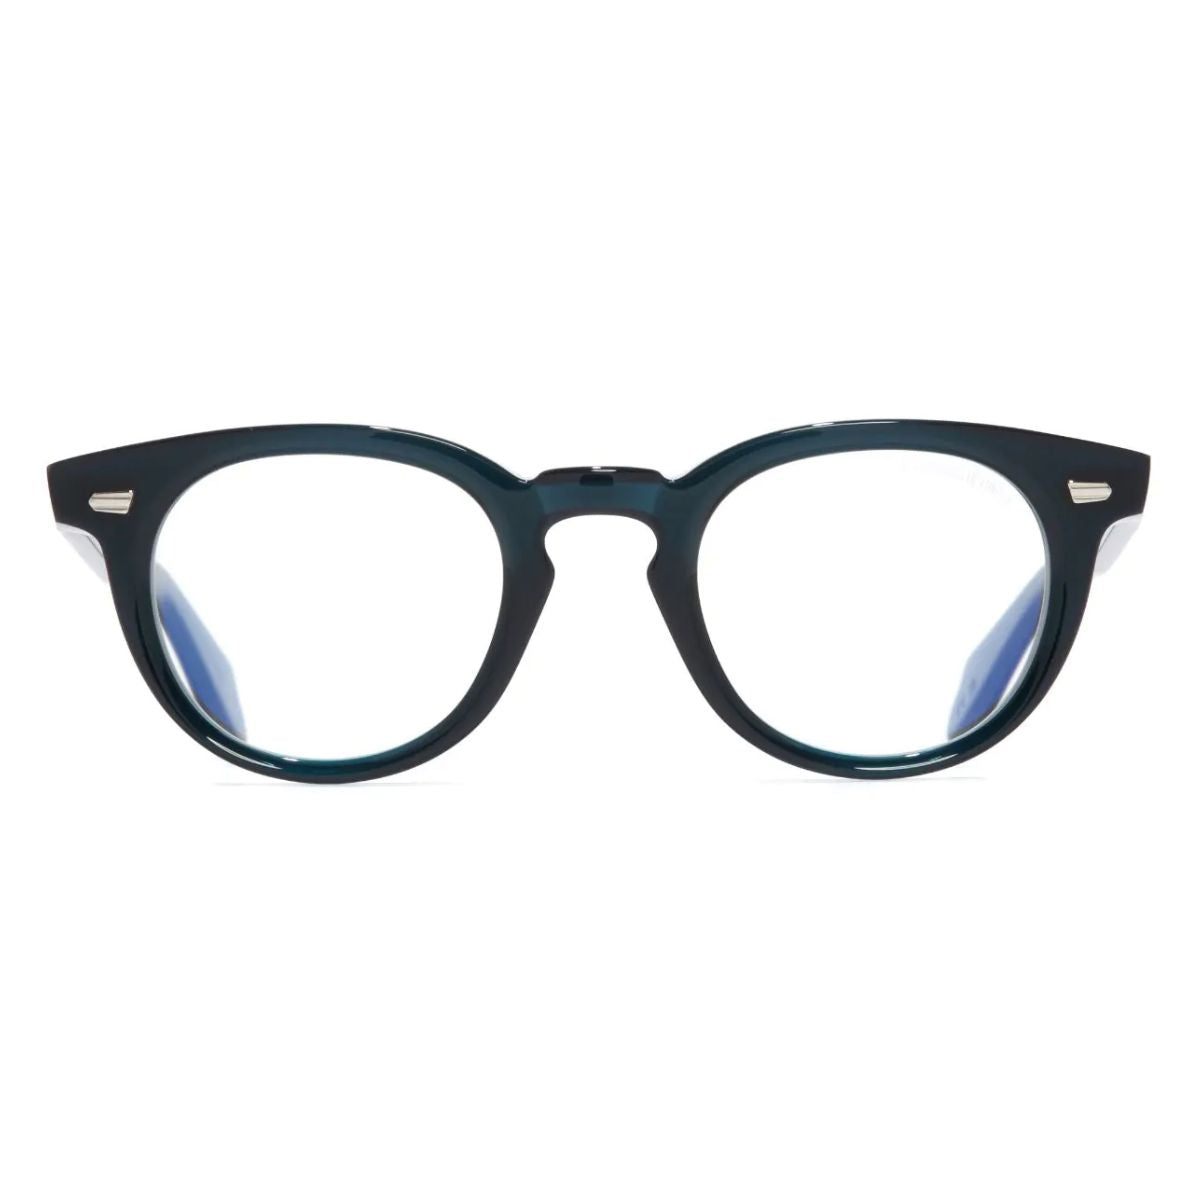 "Cutler & Gross 1405 03 Optical Frame For Mens and Womens at Optorium"